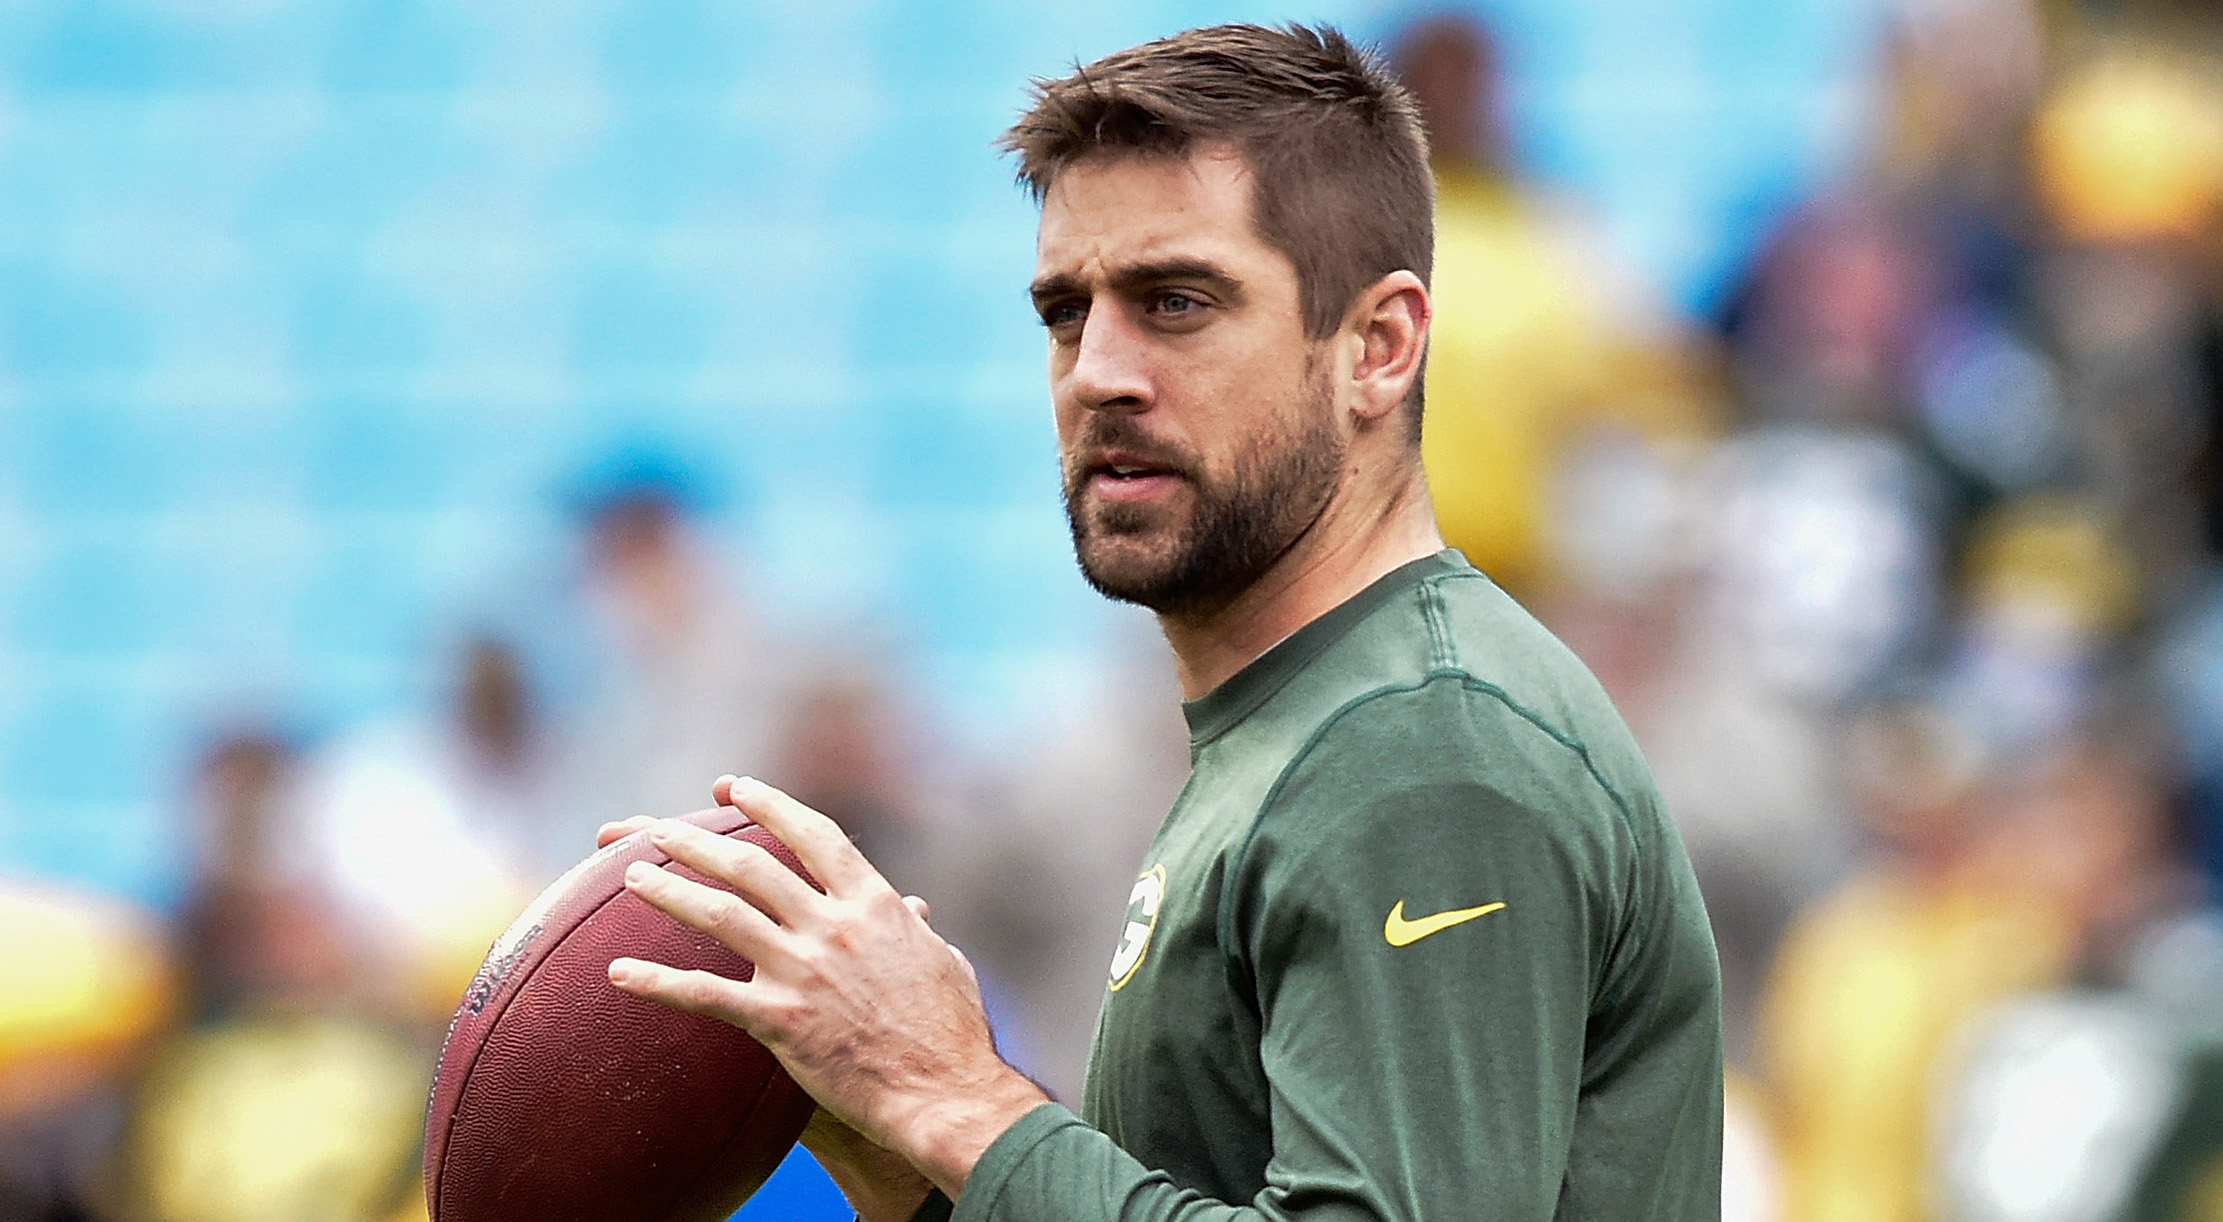 Sports Aaron Rodgers HD Wallpaper | Background Image